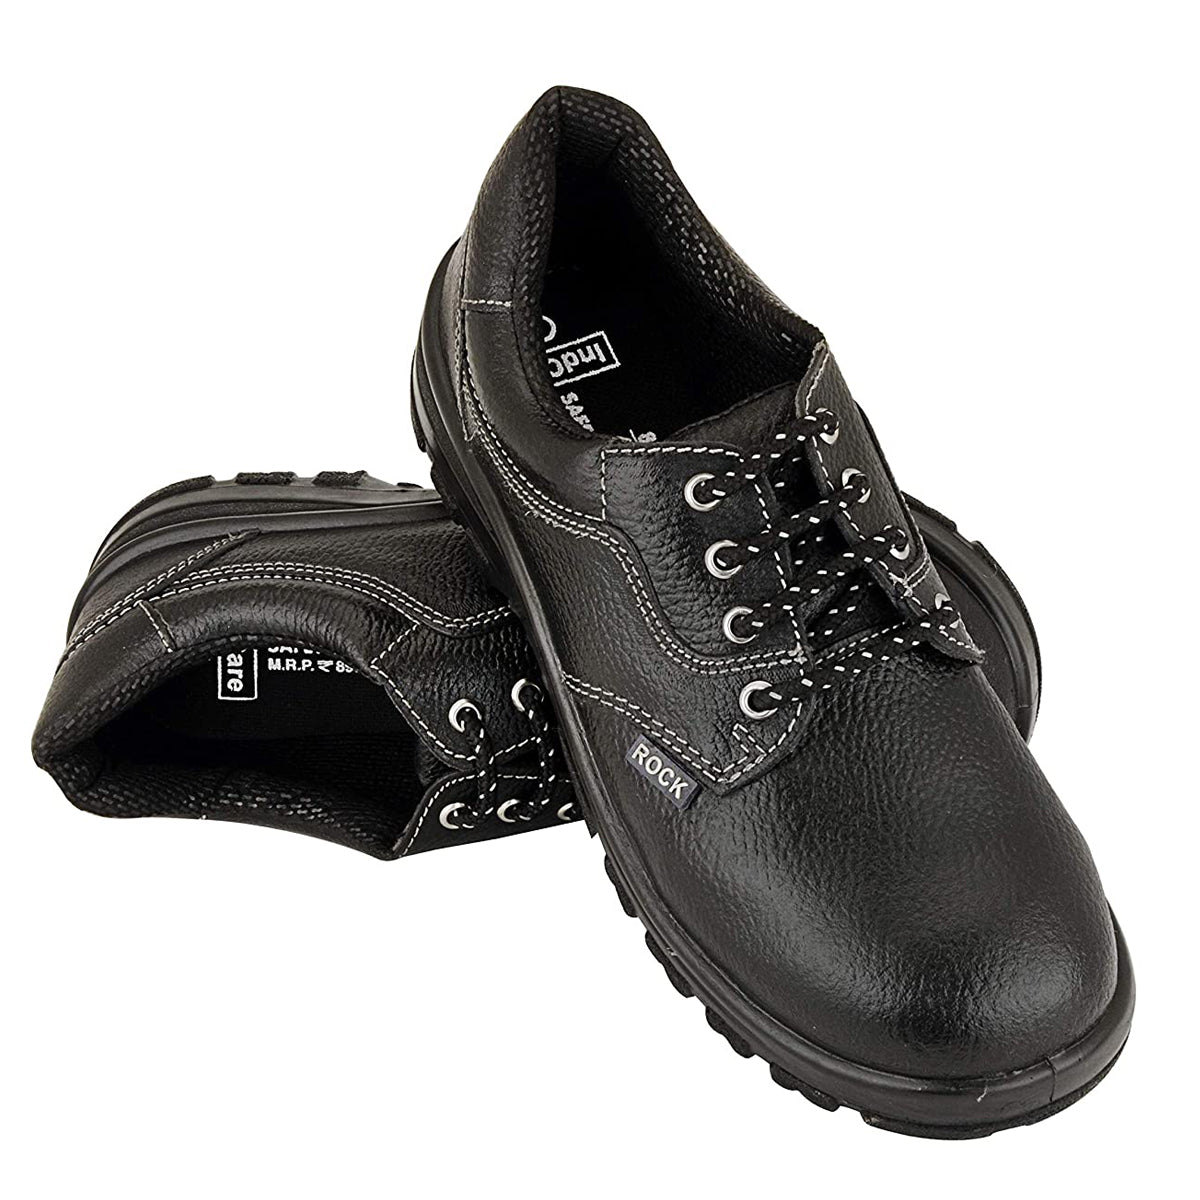 Indcare Rock Safety Shoes